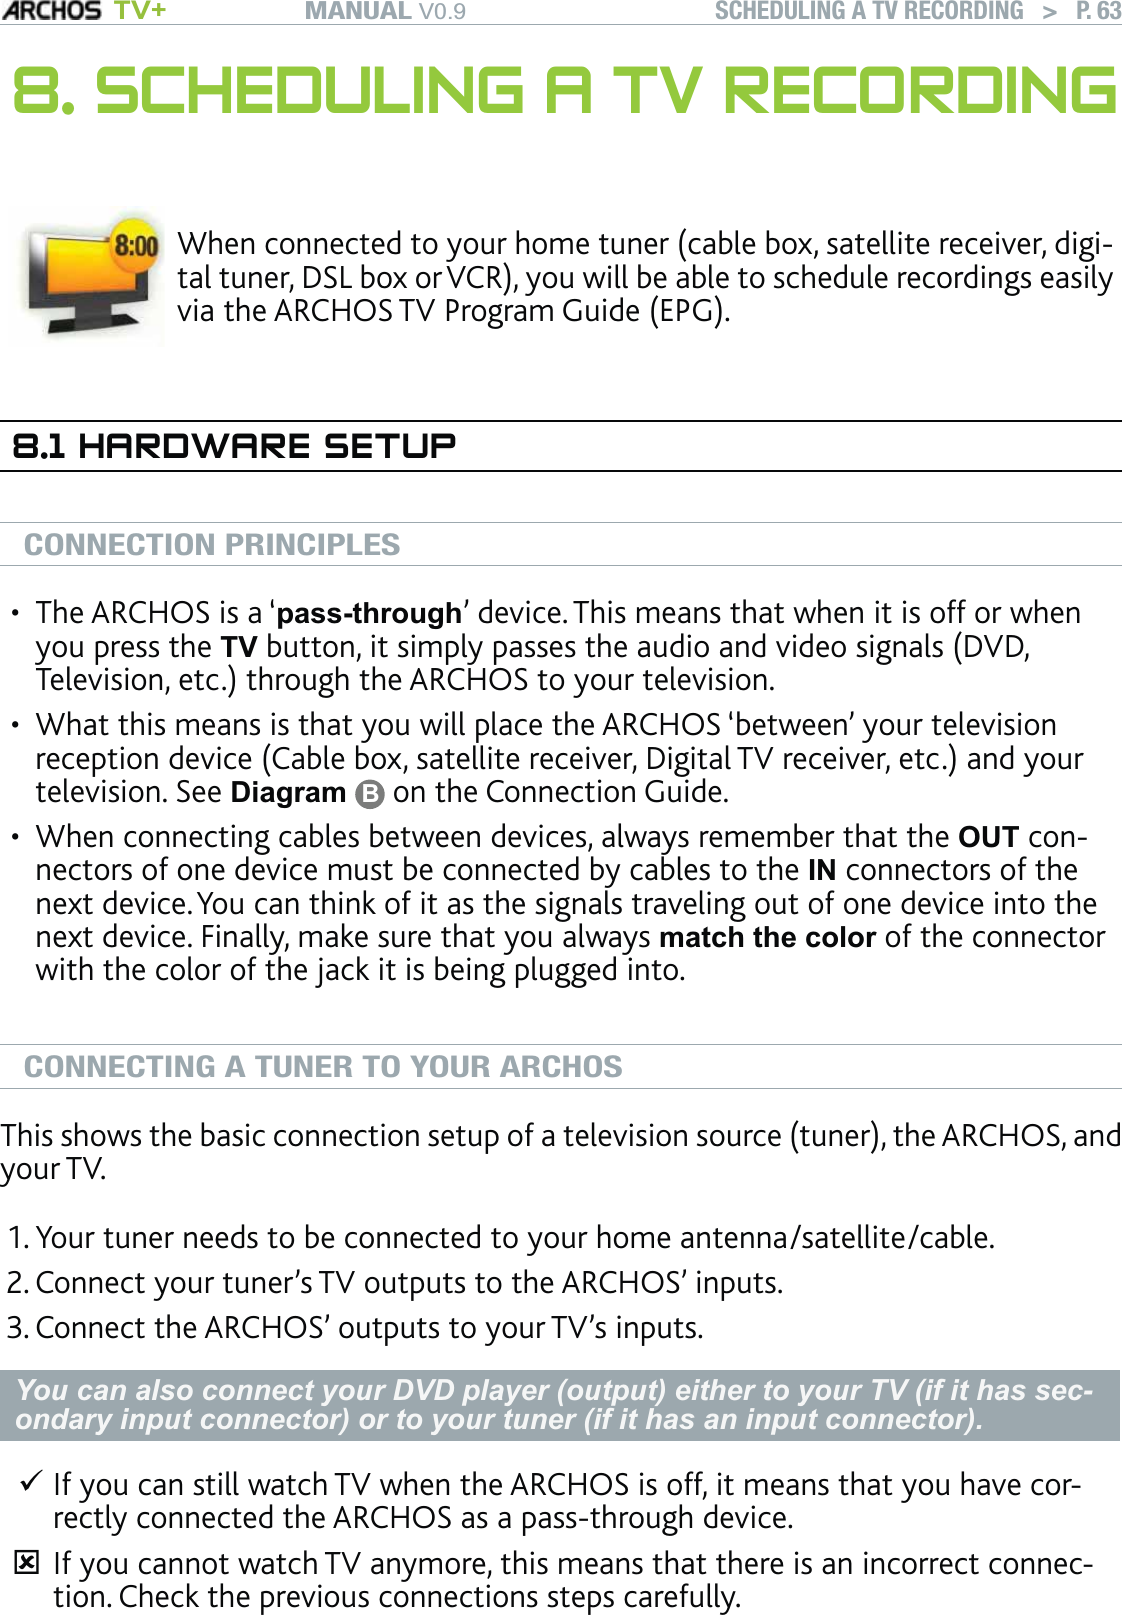 MANUAL V0.9 TV+ SCHEDULING A TV RECORDING   &gt;   P. 638. SCHEDULING A TV RECORDINGWhen connected to your home tuner (cable box, satellite receiver, digi-tal tuner, DSL box or VCR), you will be able to schedule recordings easily via the ARCHOS TV Program Guide (EPG). 8.1 HARDWARE SETUPCONNECTION PRINCIPLESThe ARCHOS is a ‘pass-through’ device. This means that when it is off or when you press the TV button, it simply passes the audio and video signals (DVD, Television, etc.) through the ARCHOS to your television. What this means is that you will place the ARCHOS ‘between’ your television reception device (Cable box, satellite receiver, Digital TV receiver, etc.) and your television. See Diagram  B on the Connection Guide.When connecting cables between devices, always remember that the OUT con-nectors of one device must be connected by cables to the IN connectors of the next device. You can think of it as the signals traveling out of one device into the next device. Finally, make sure that you always match the color of the connector with the color of the jack it is being plugged into.CONNECTING A TUNER TO YOUR ARCHOSThis shows the basic connection setup of a television source (tuner), the ARCHOS, and your TV. Your tuner needs to be connected to your home antenna/satellite/cable.Connect your tuner’s TV outputs to the ARCHOS’ inputs.Connect the ARCHOS’ outputs to your TV’s inputs.You can also connect your DVD player (output) either to your TV (if it has sec-ondary input connector) or to your tuner (if it has an input connector).If you can still watch TV when the ARCHOS is off, it means that you have cor-rectly connected the ARCHOS as a pass-through device. If you cannot watch TV anymore, this means that there is an incorrect connec-tion. Check the previous connections steps carefully.•••1.2.3.